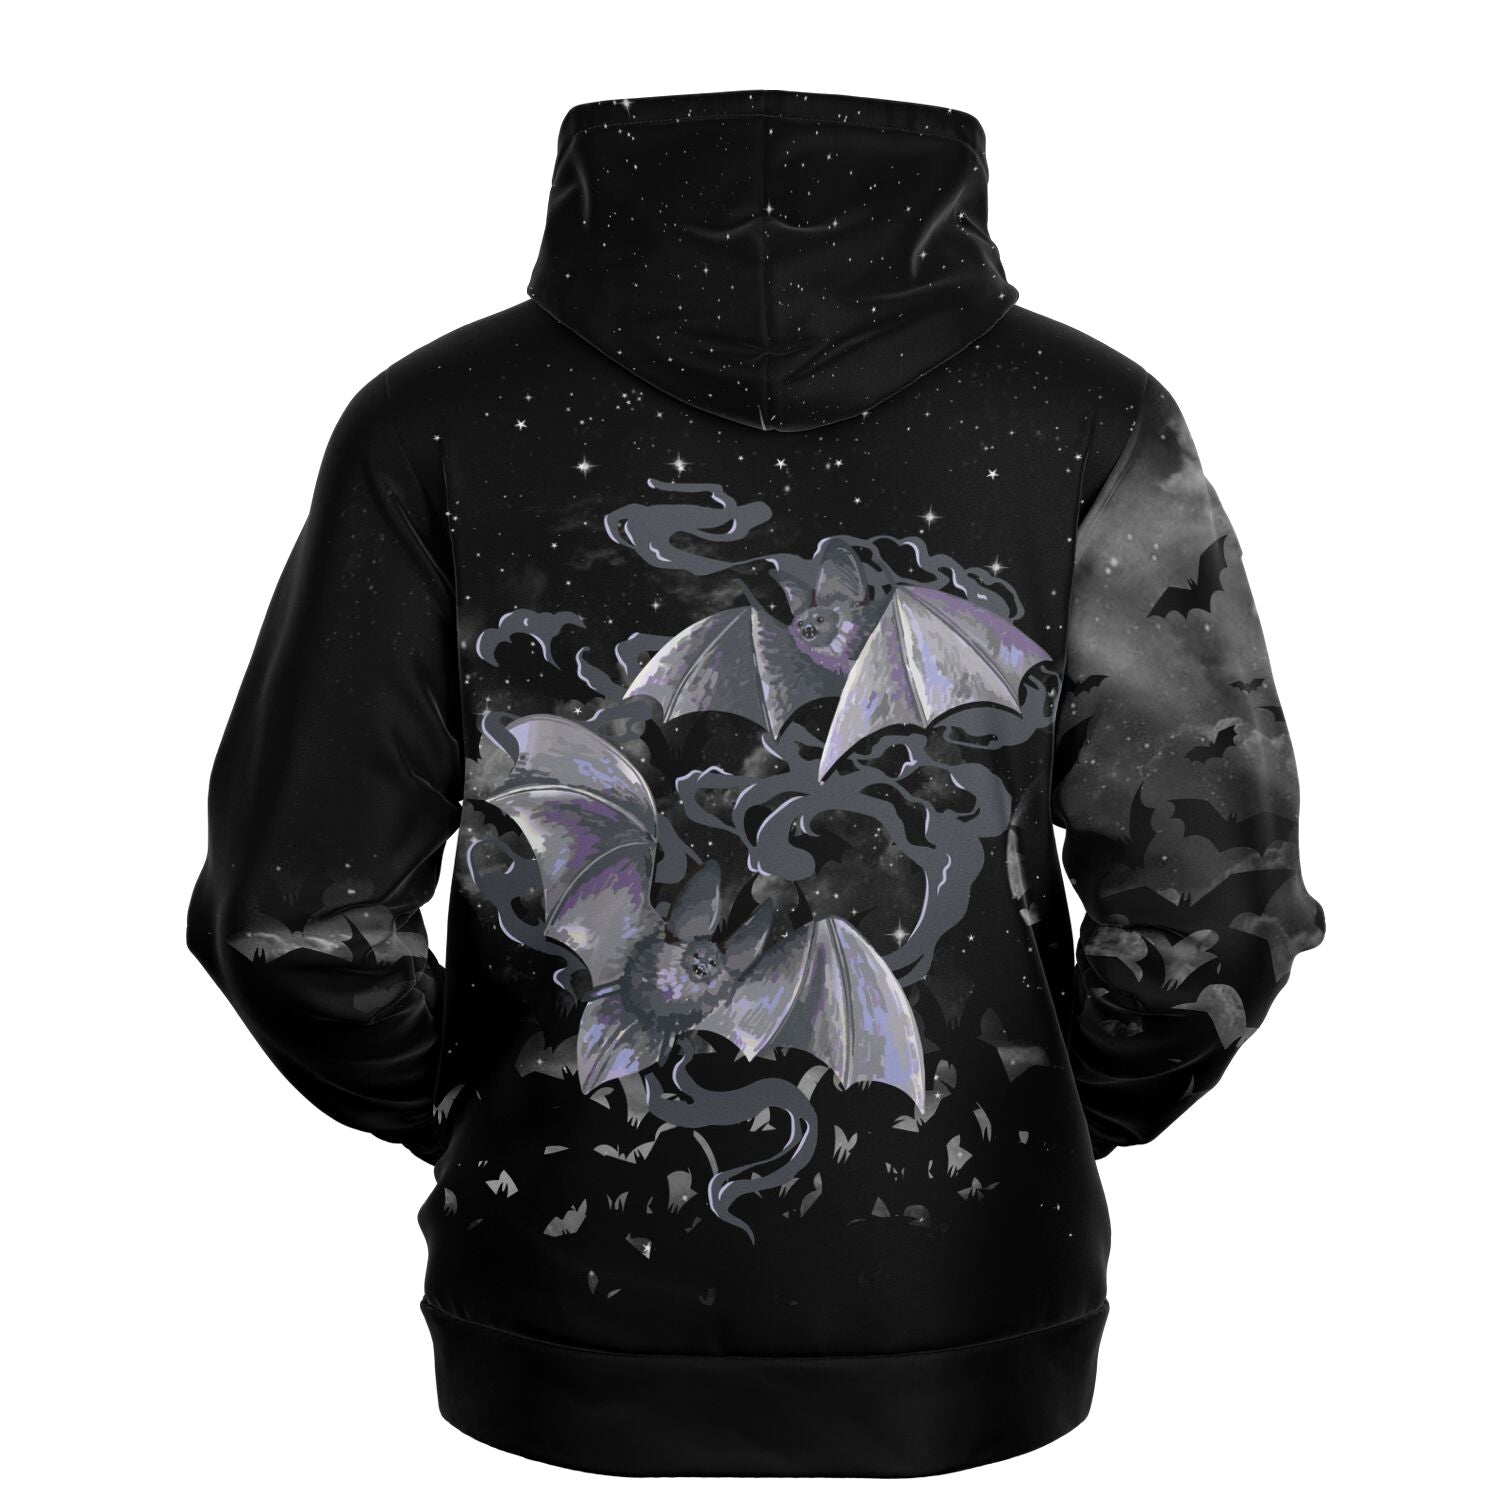 Bats in the Night Fashion Hoodie